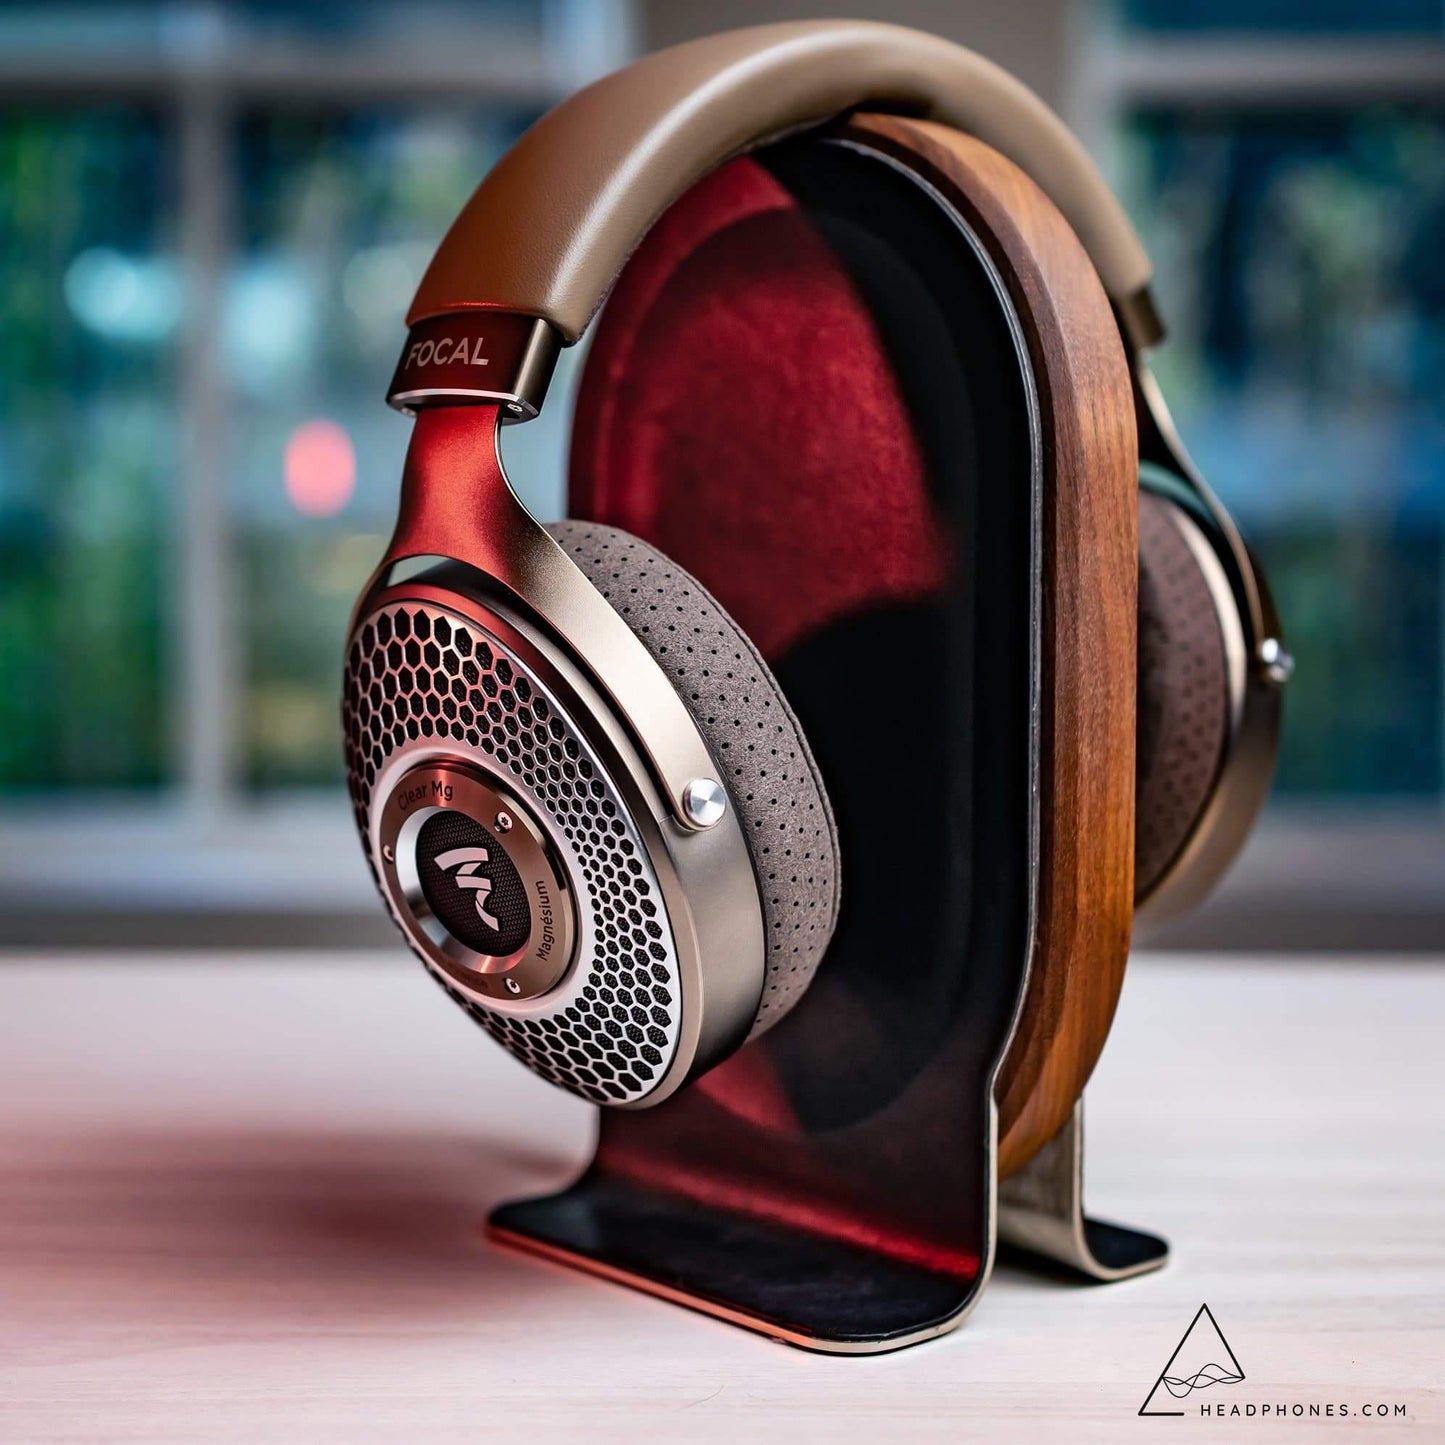 Focal Clear Mg Dynamic Open-Back Over-Ear Headphones on Woodgrove headphone stand | Available to purchase on Headphones.com